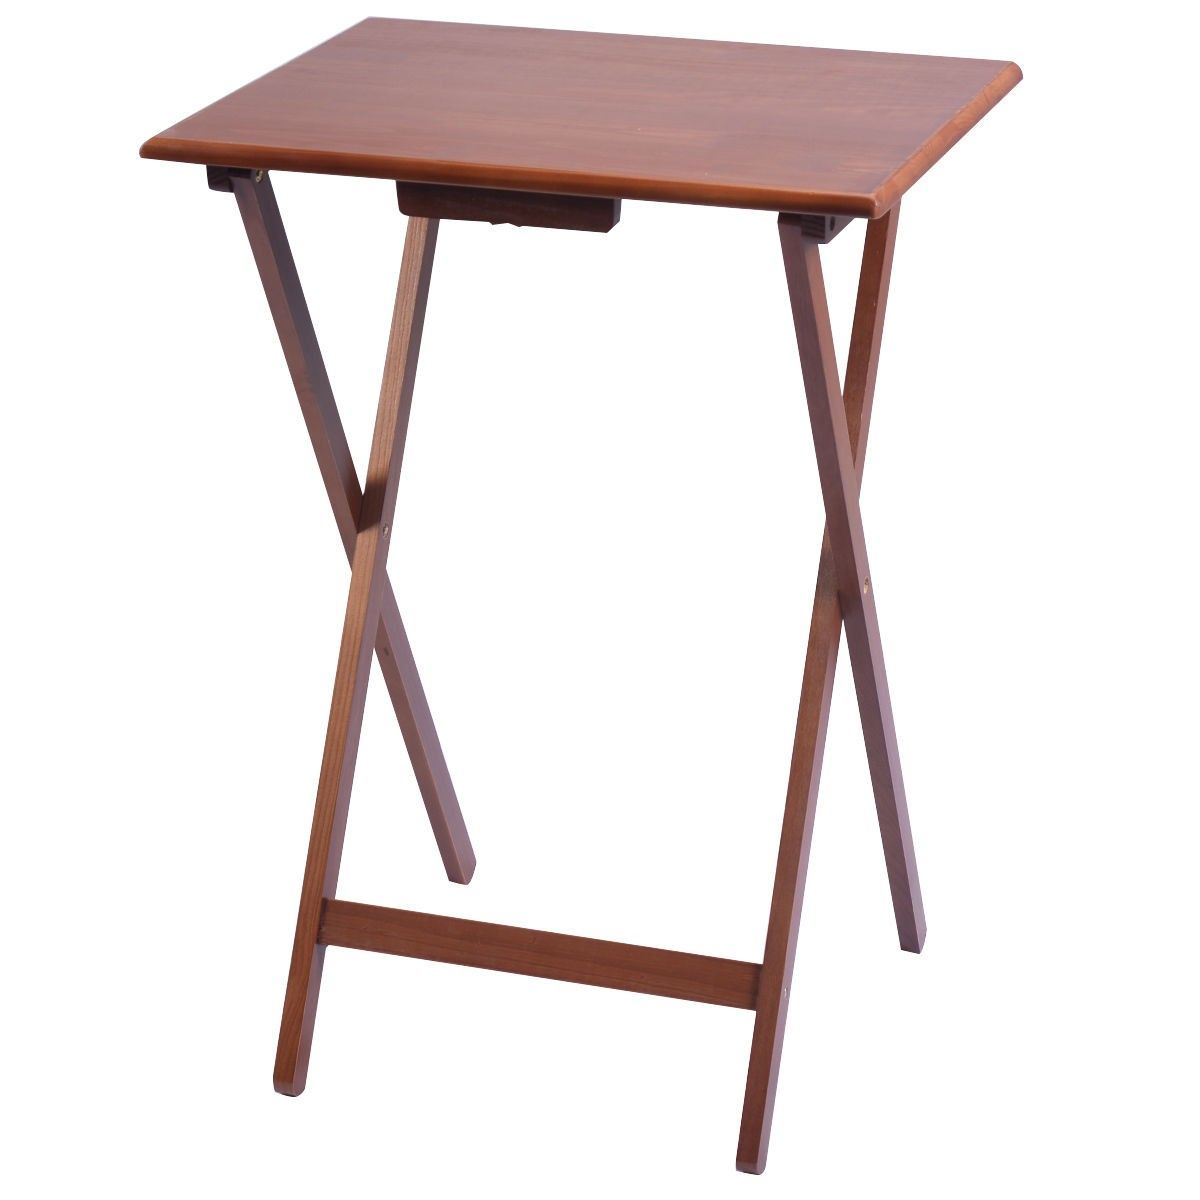 New Set Of 4 Portable Wood Tv Table Folding Tray Desk Regarding Folding Wooden Tv Tray Tables (View 14 of 15)